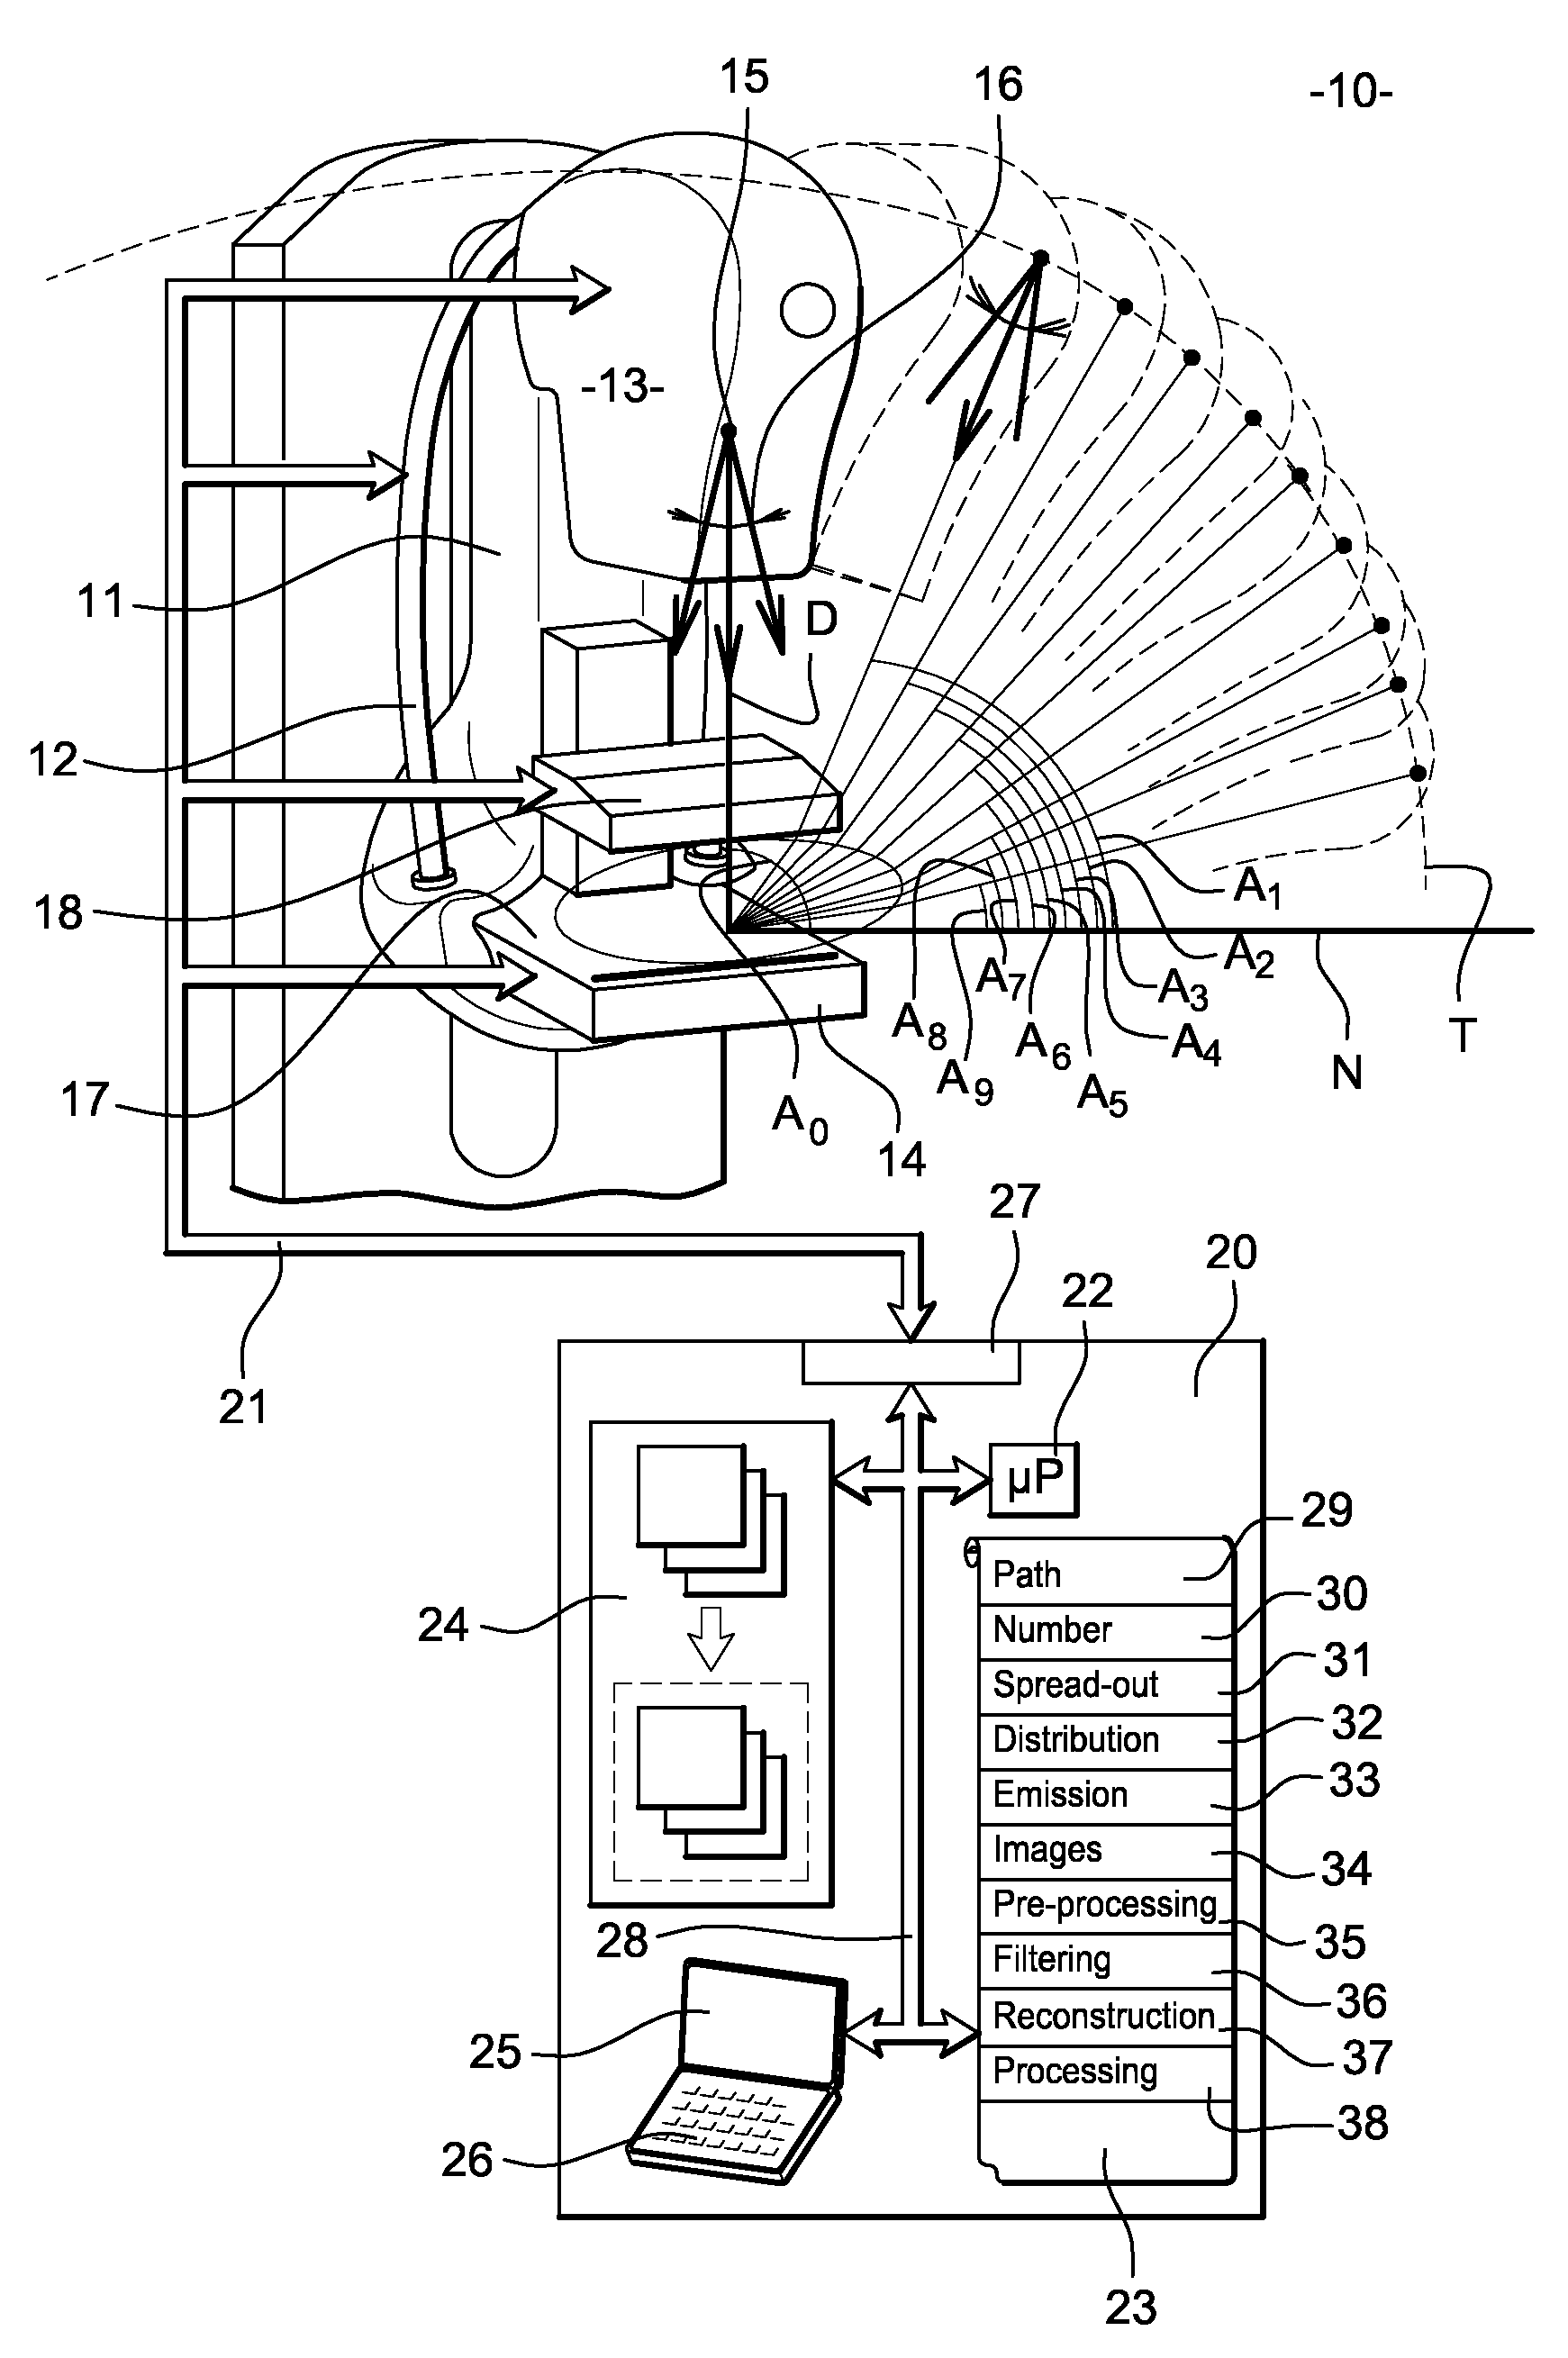 Method for obtaining a tomosynthesis image